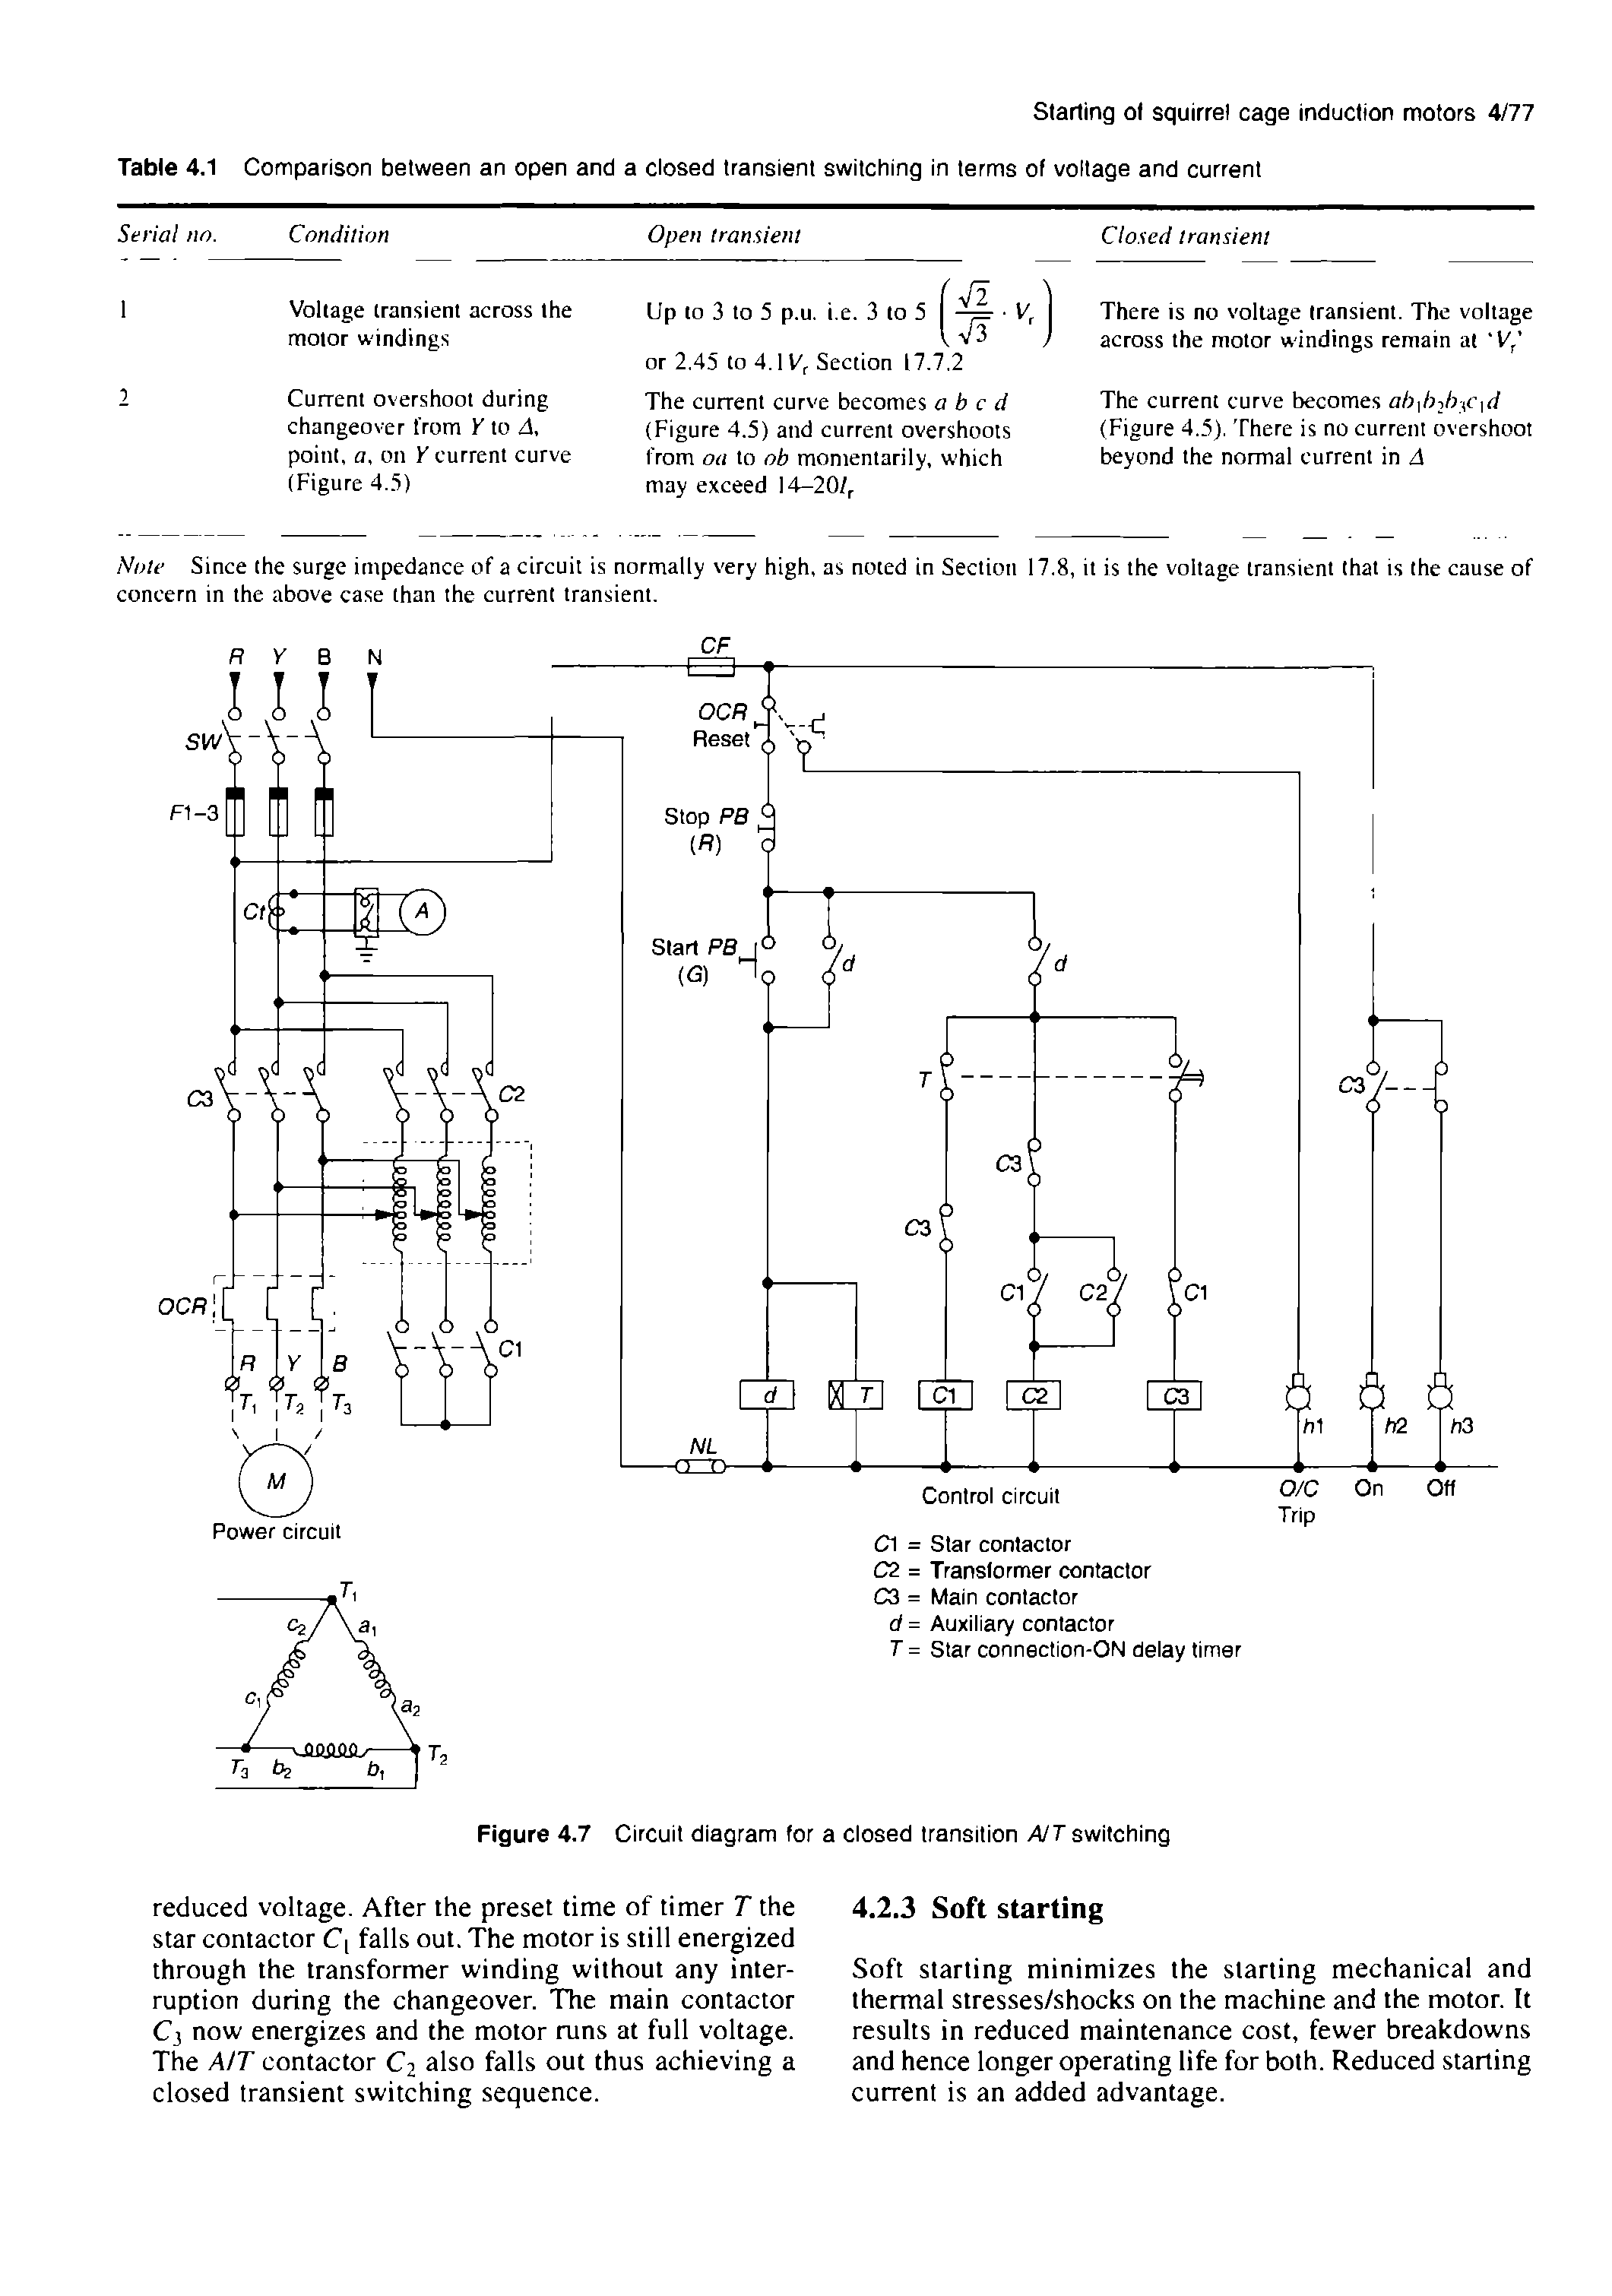 Figure 4.7 Circuit diagram for a closed transition AIT switching...